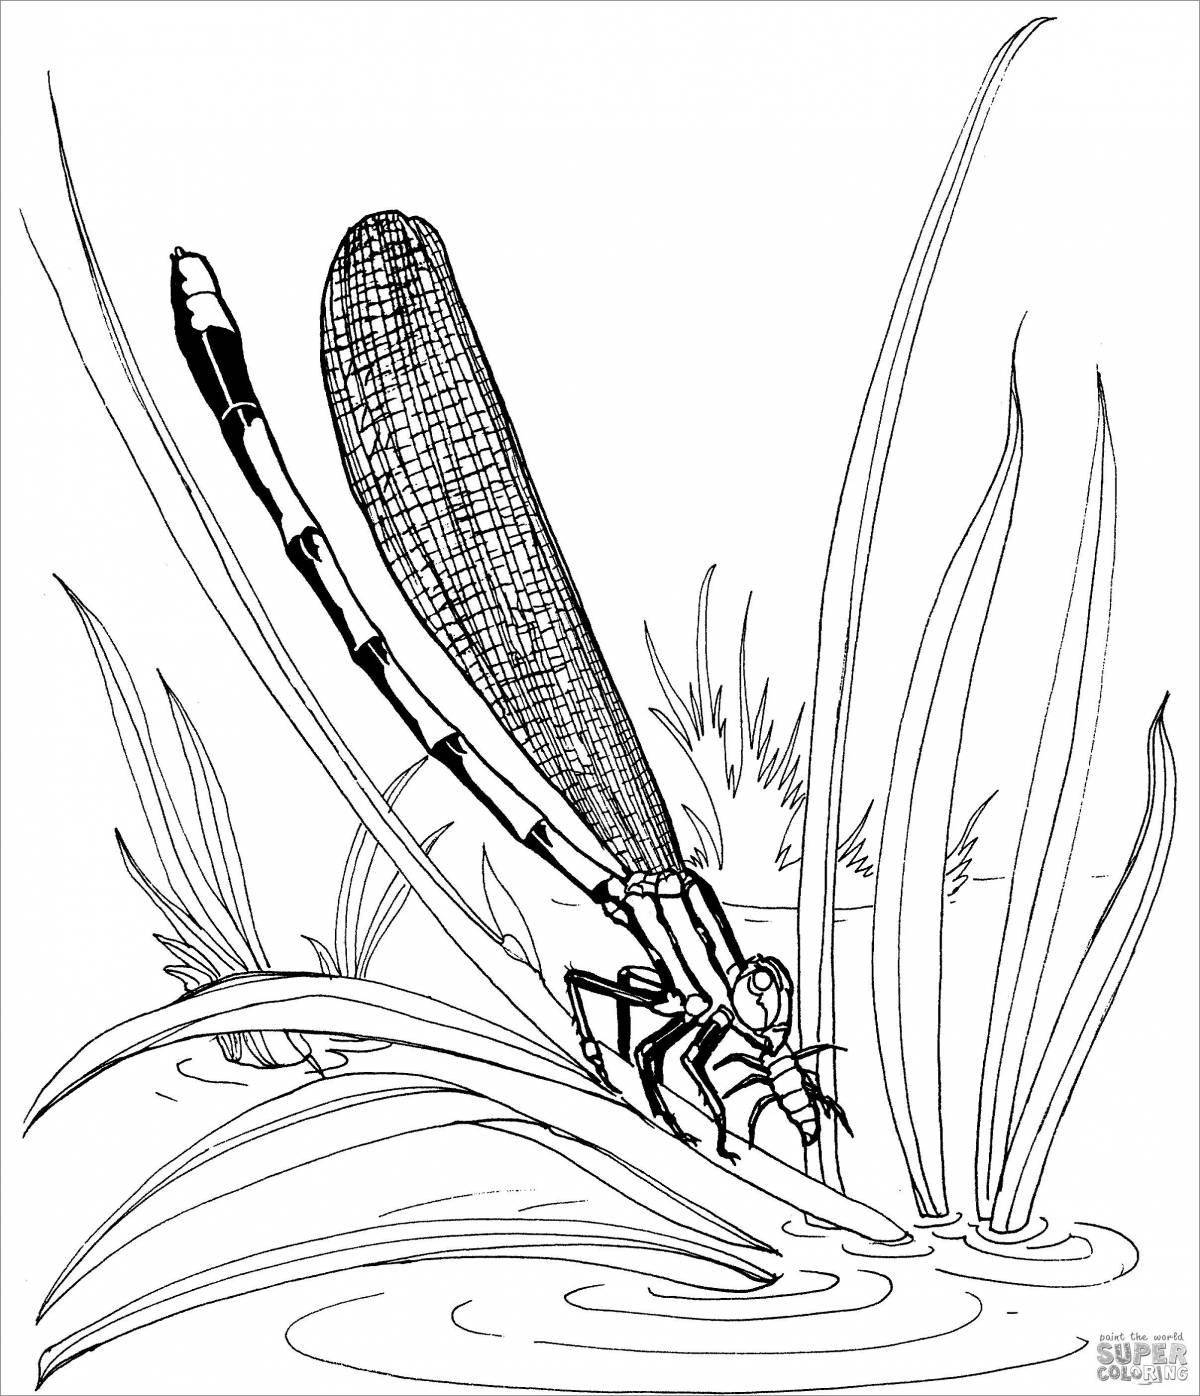 Glamorous reeds coloring book for preschoolers